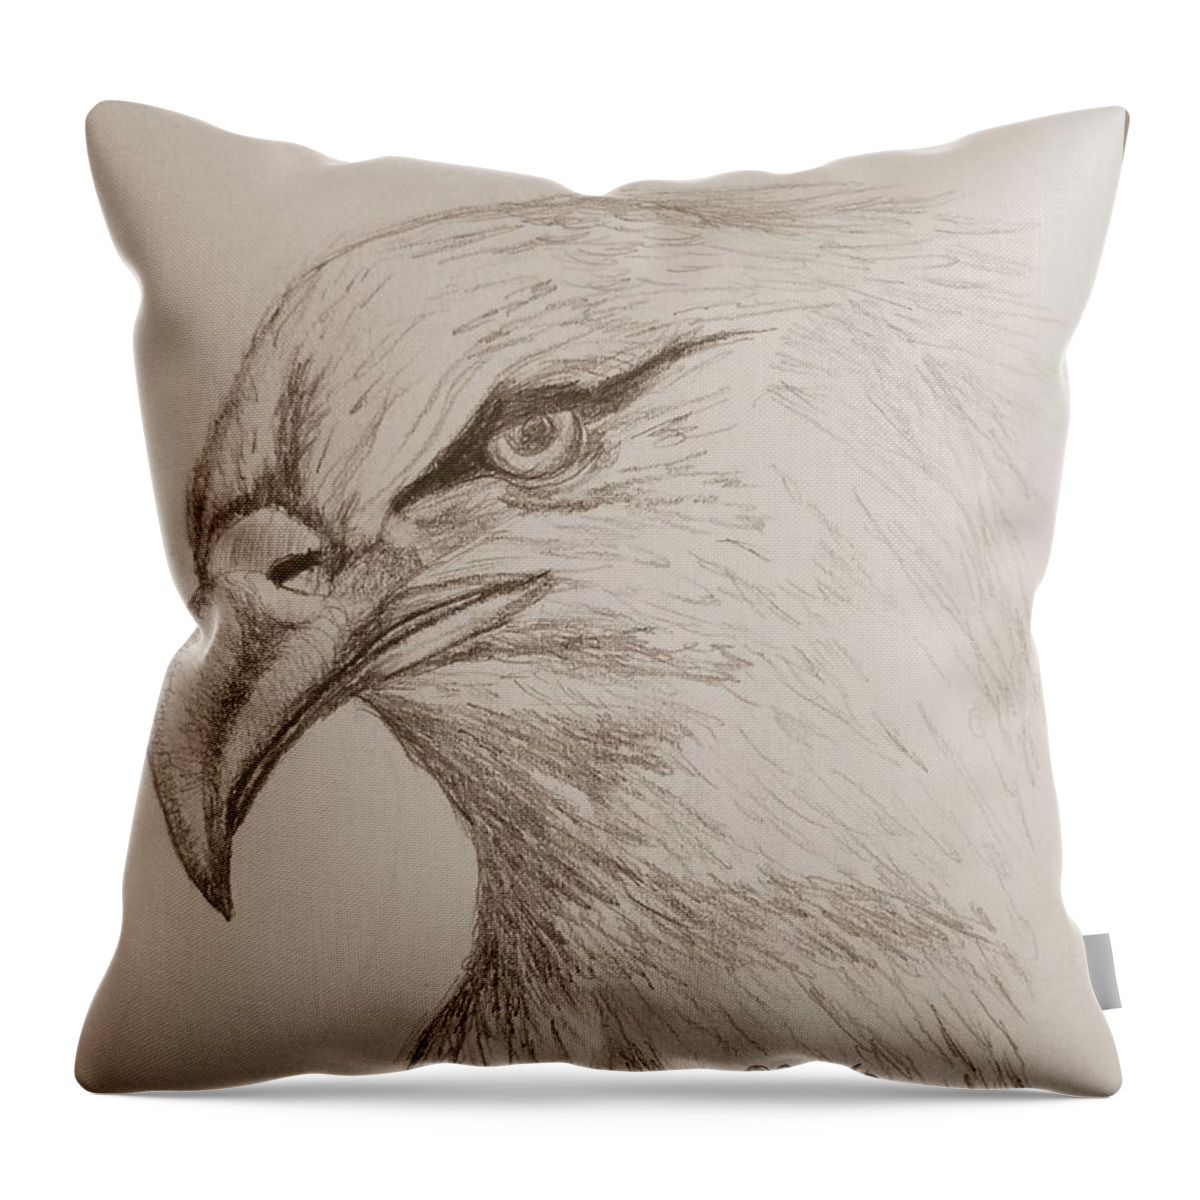 Eagle Drawing 1 Throw Pillow featuring the drawing Eagle Drawing 1 by Maria Urso